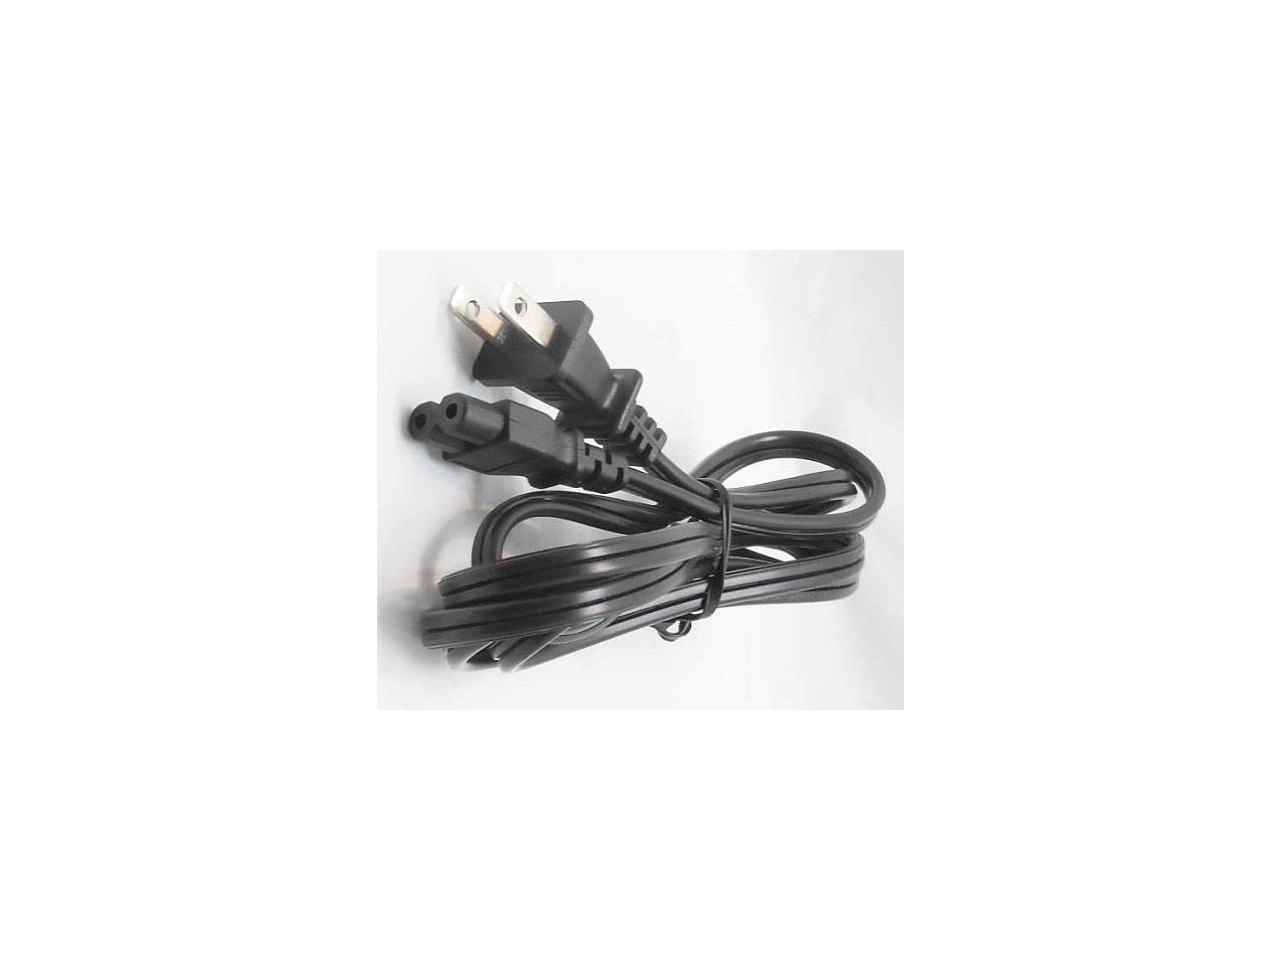 POWER CABLE LEAD FOR HP OFFICEJET 4620 4622 ALL IN ONE PRINTERS-2 PIN EU PLUG 